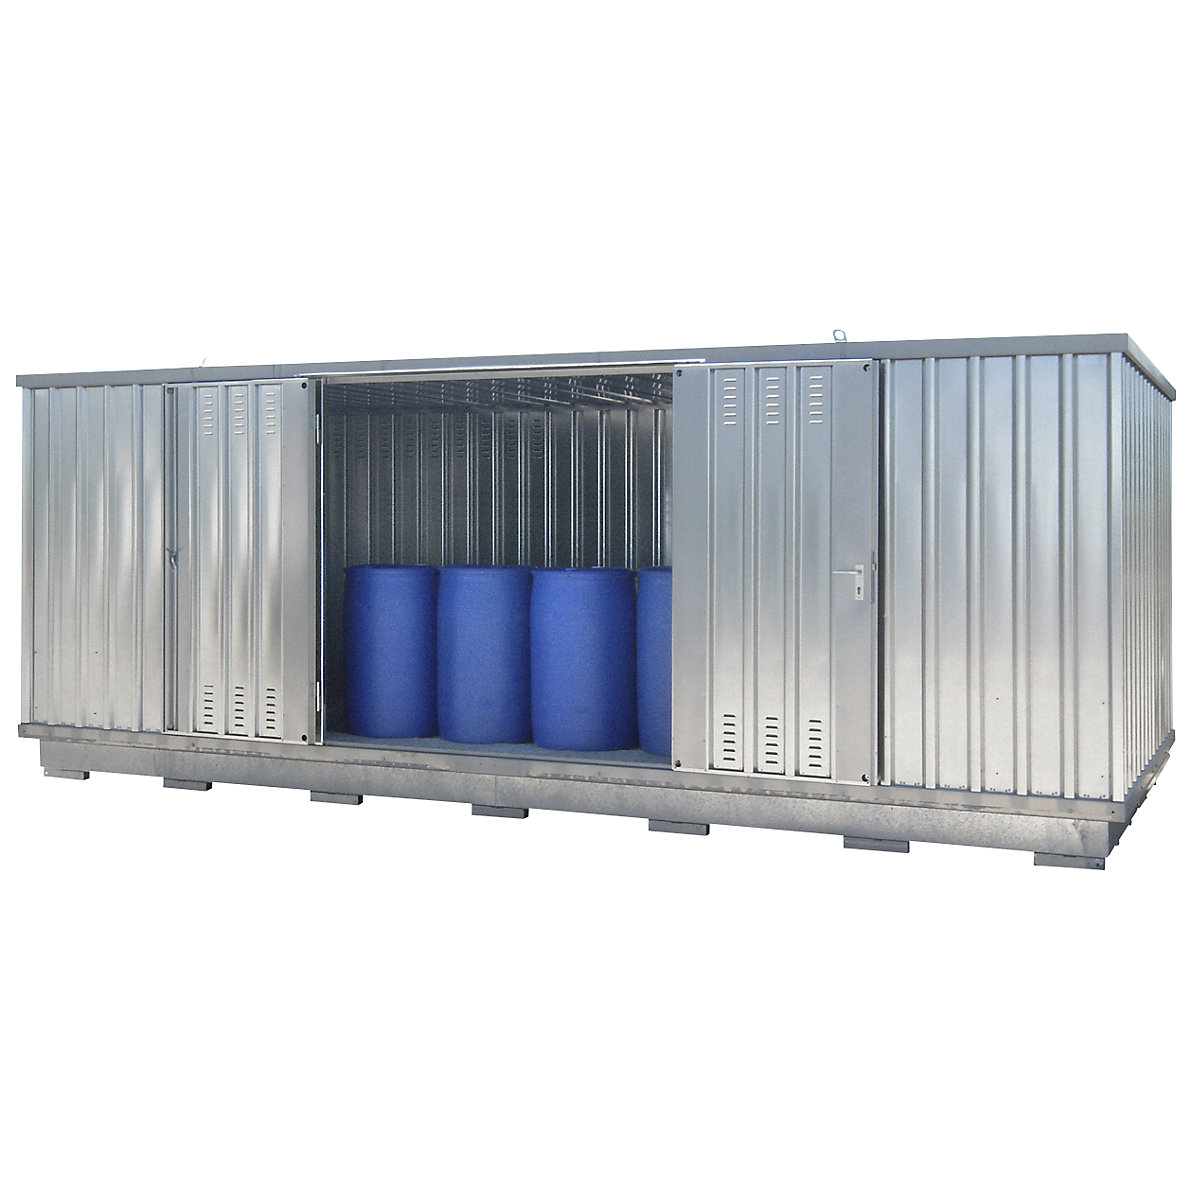 Hazardous goods container also for the active storage of flammable media – LaCont